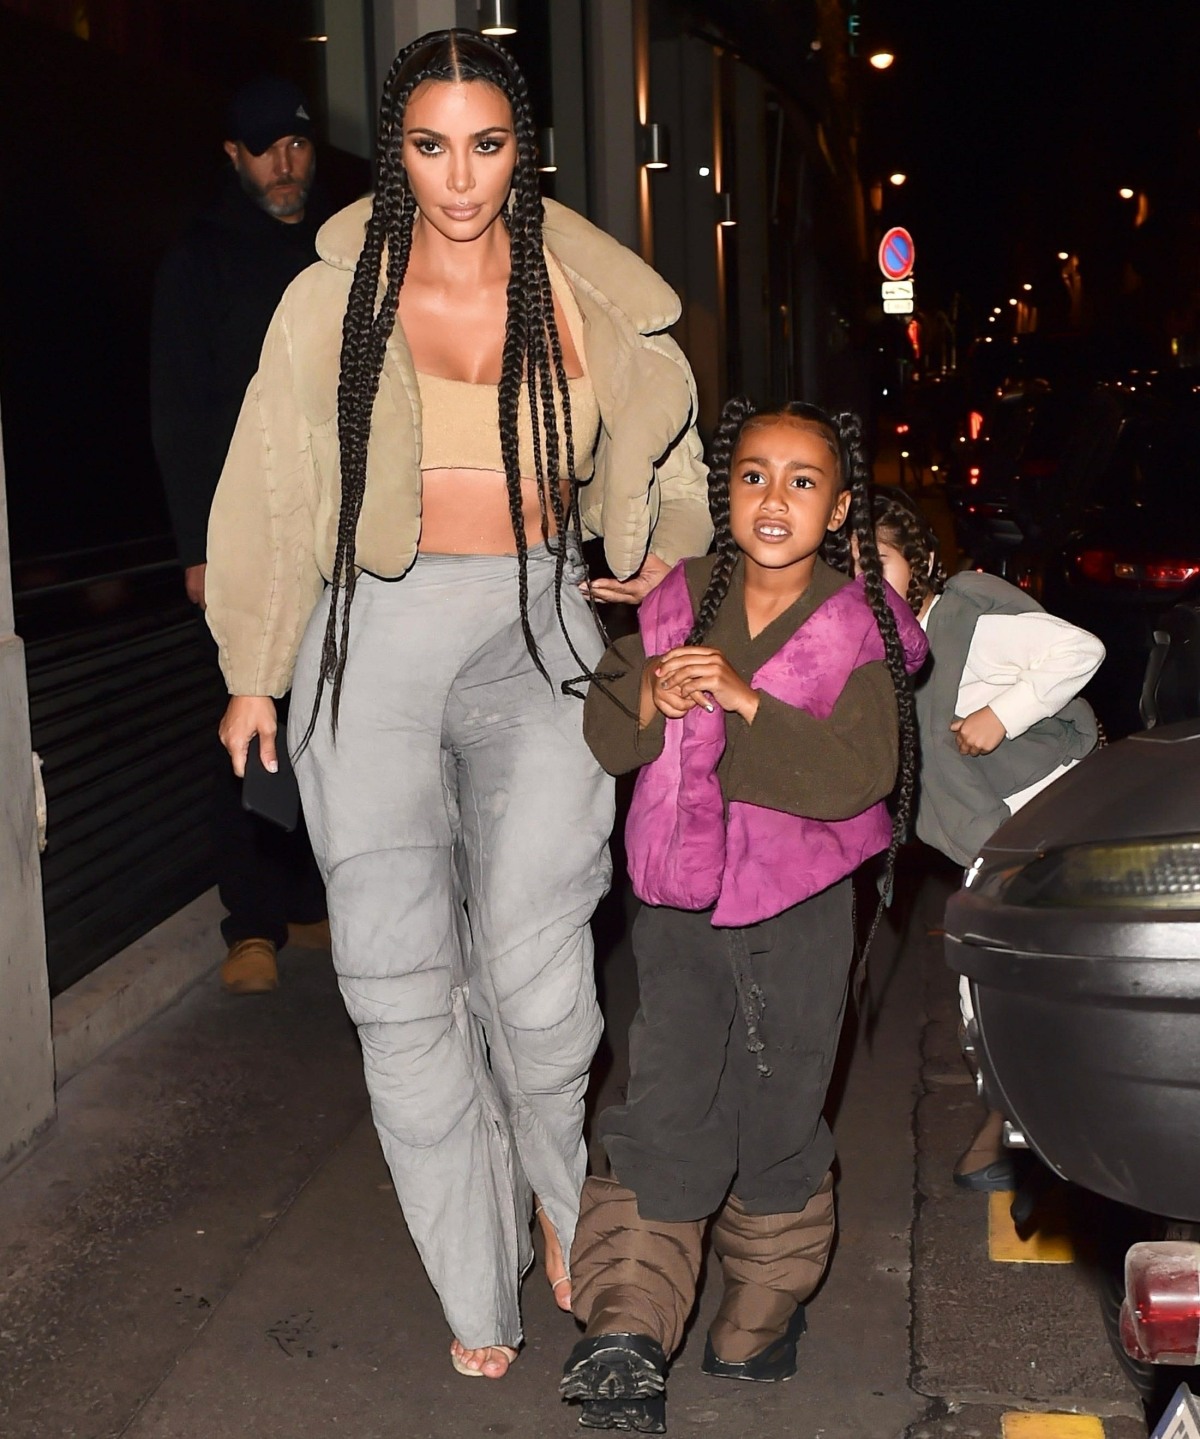 Kim Kardashian arrives at the Kanye West after party with daughter North West and sister Kourtney Kardashian